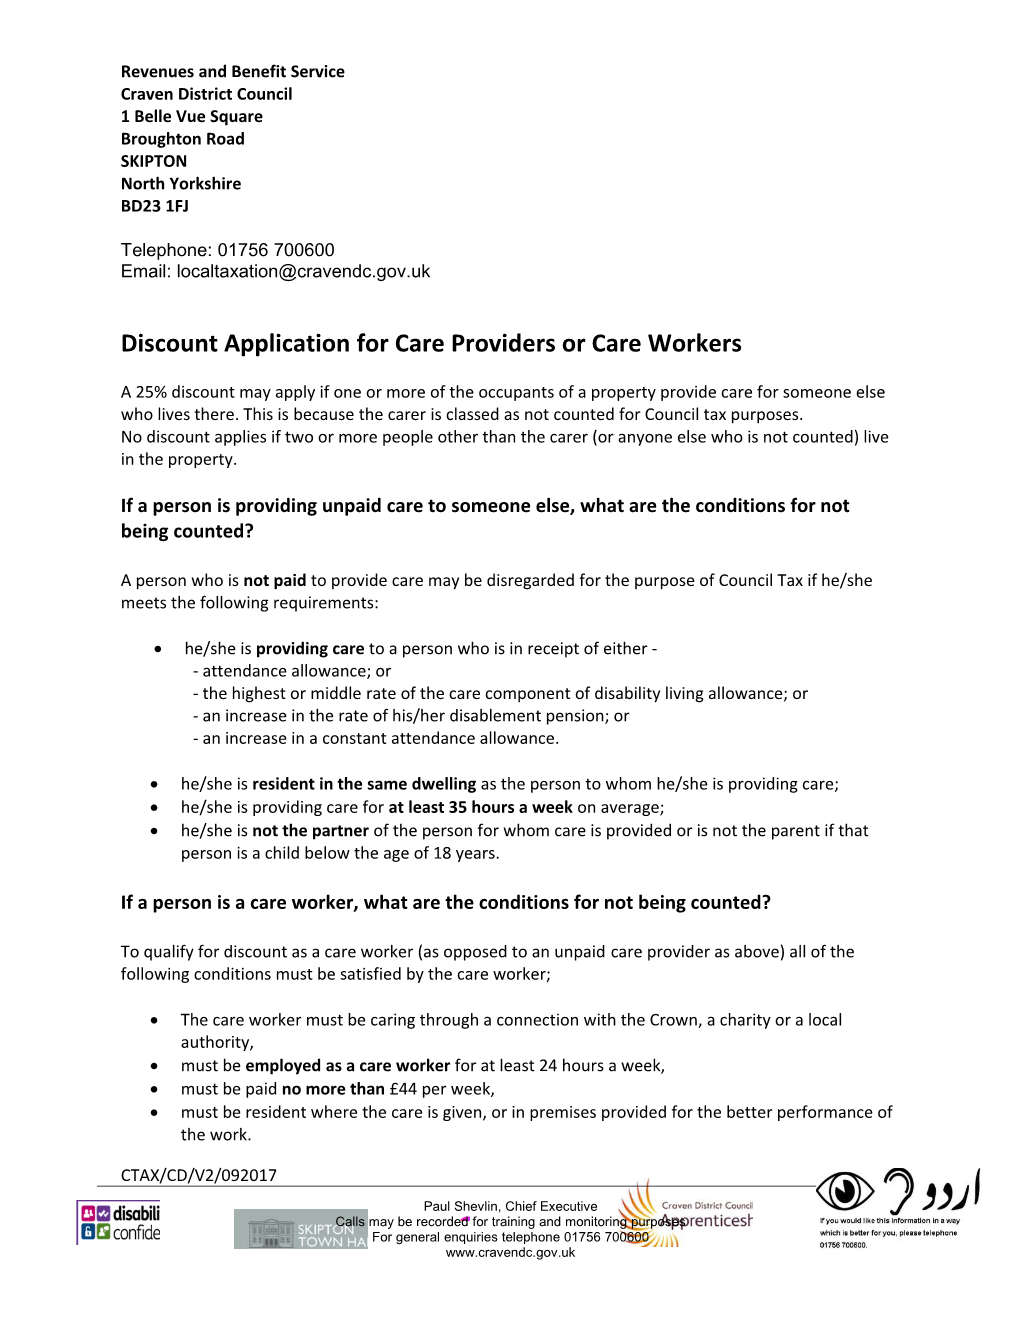 Discount Application for Care Providers Or Care Workers